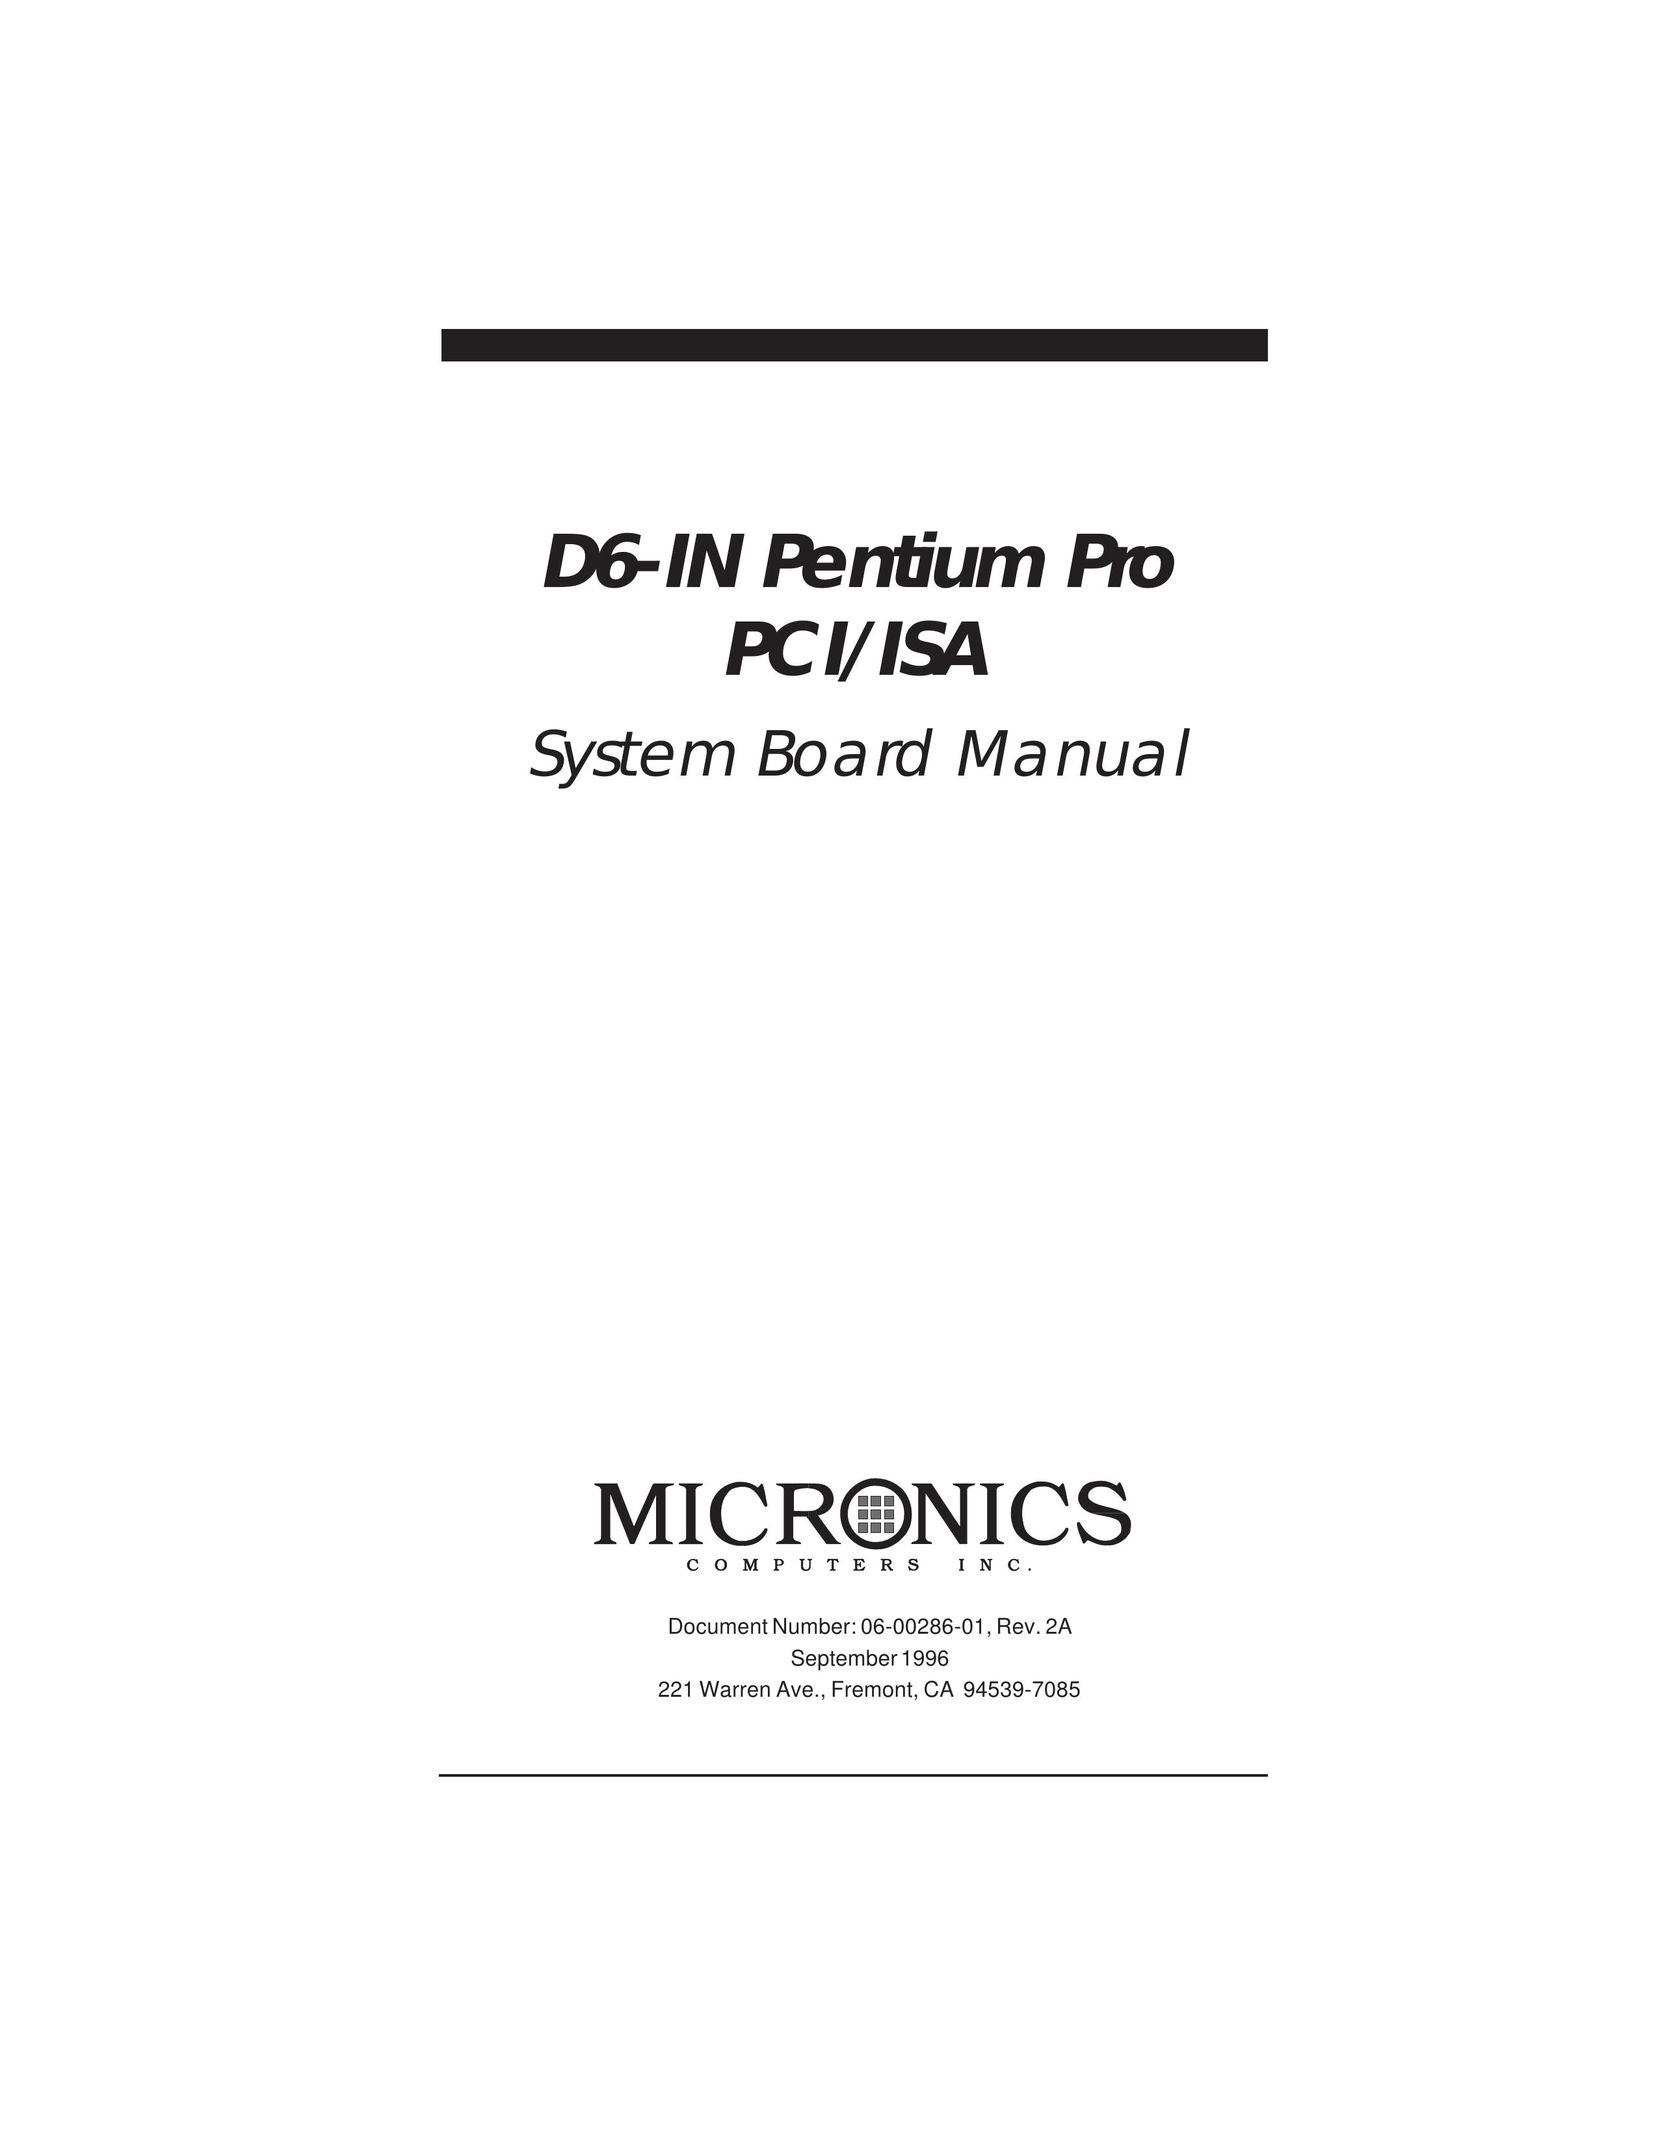 Star Micronics D6-IN Network Card User Manual